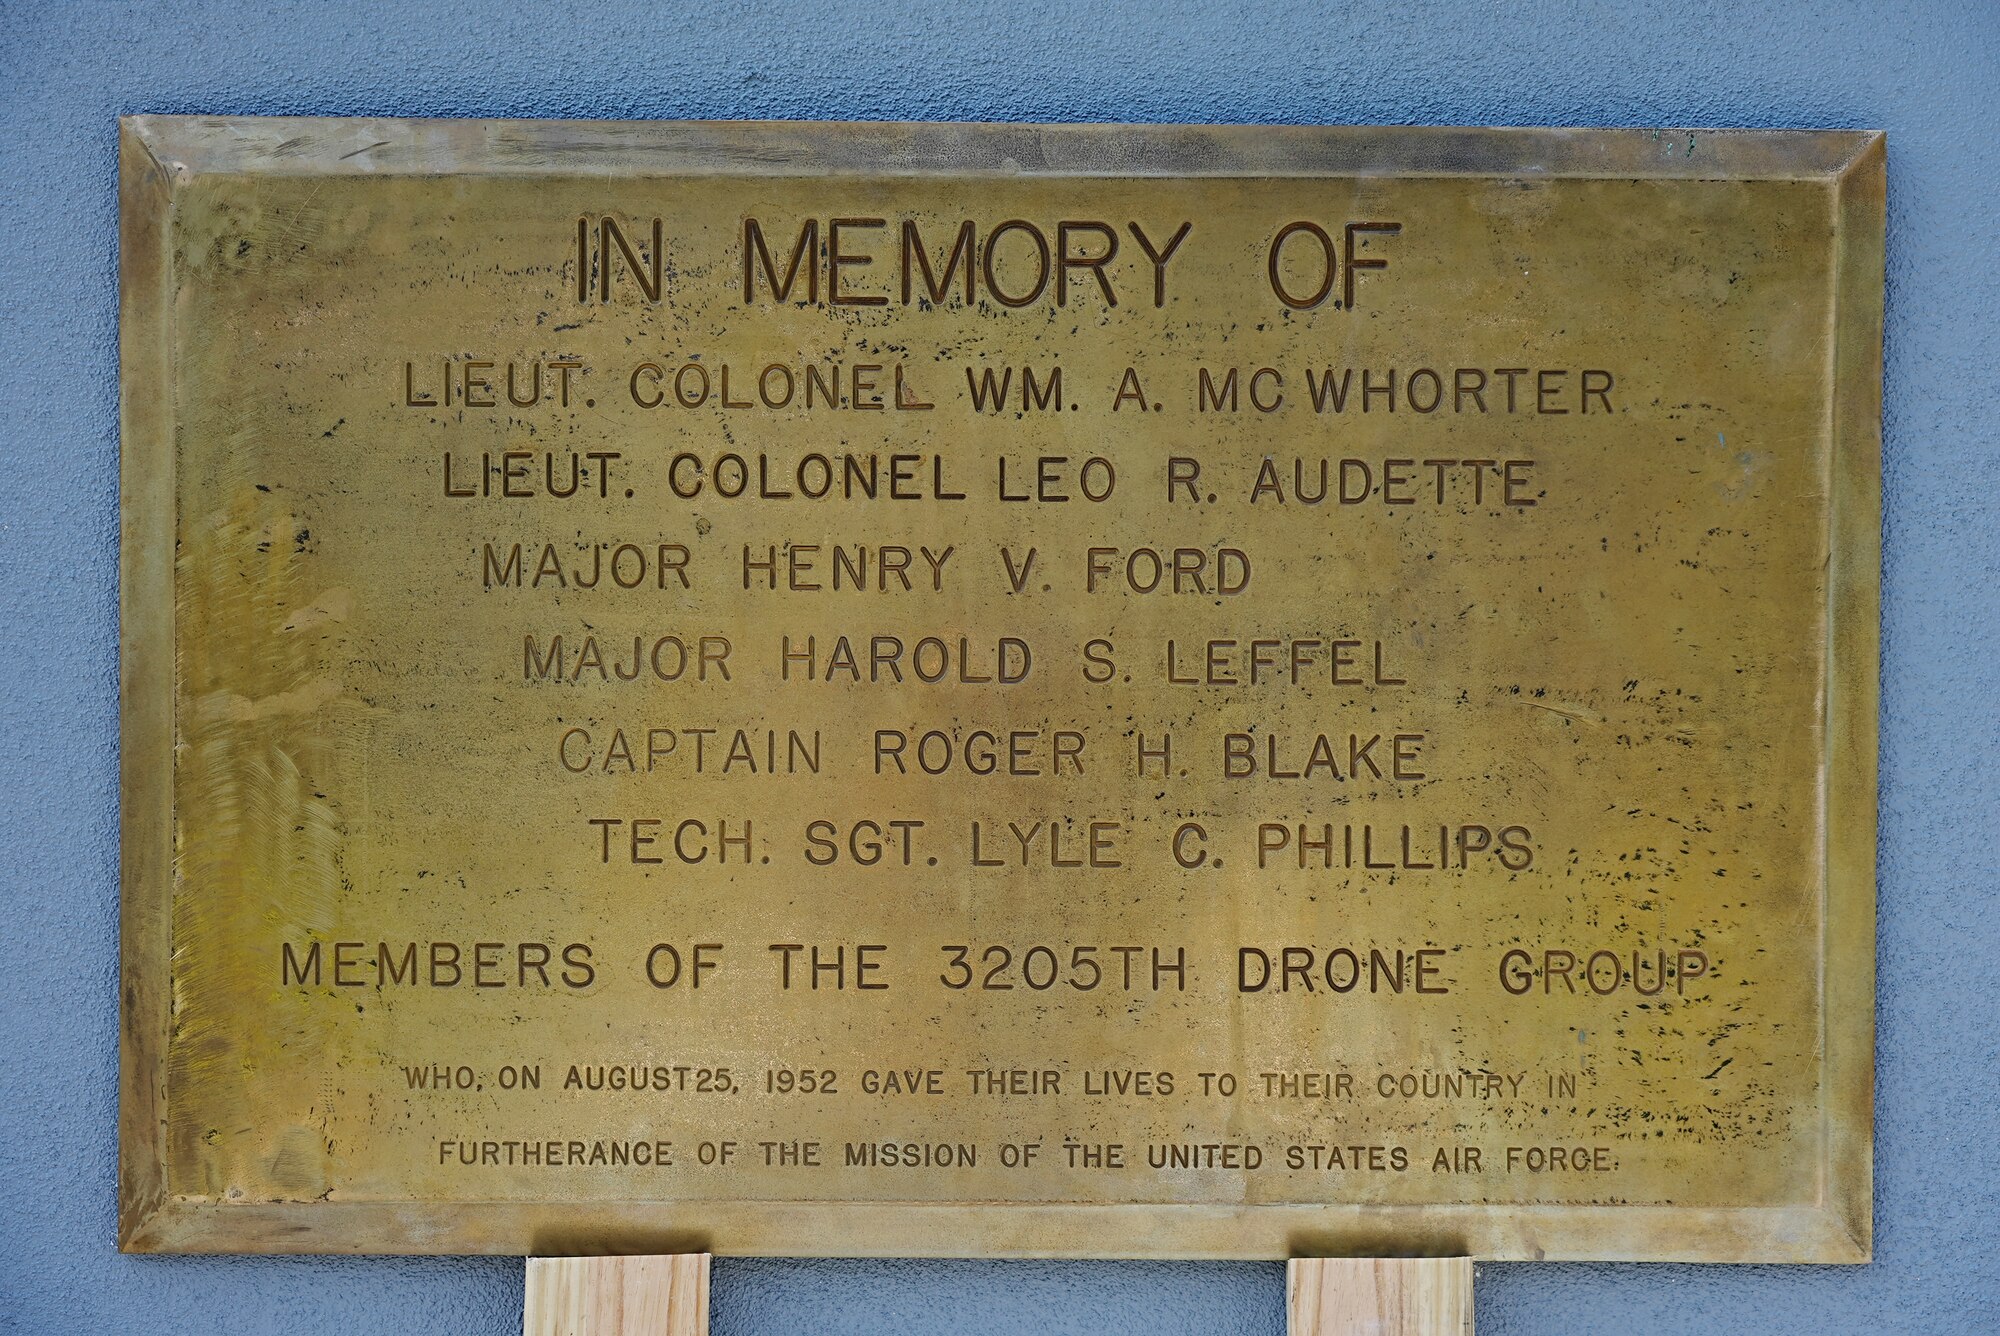 Gold plaque sits on two planks while leaning on concrete wall.